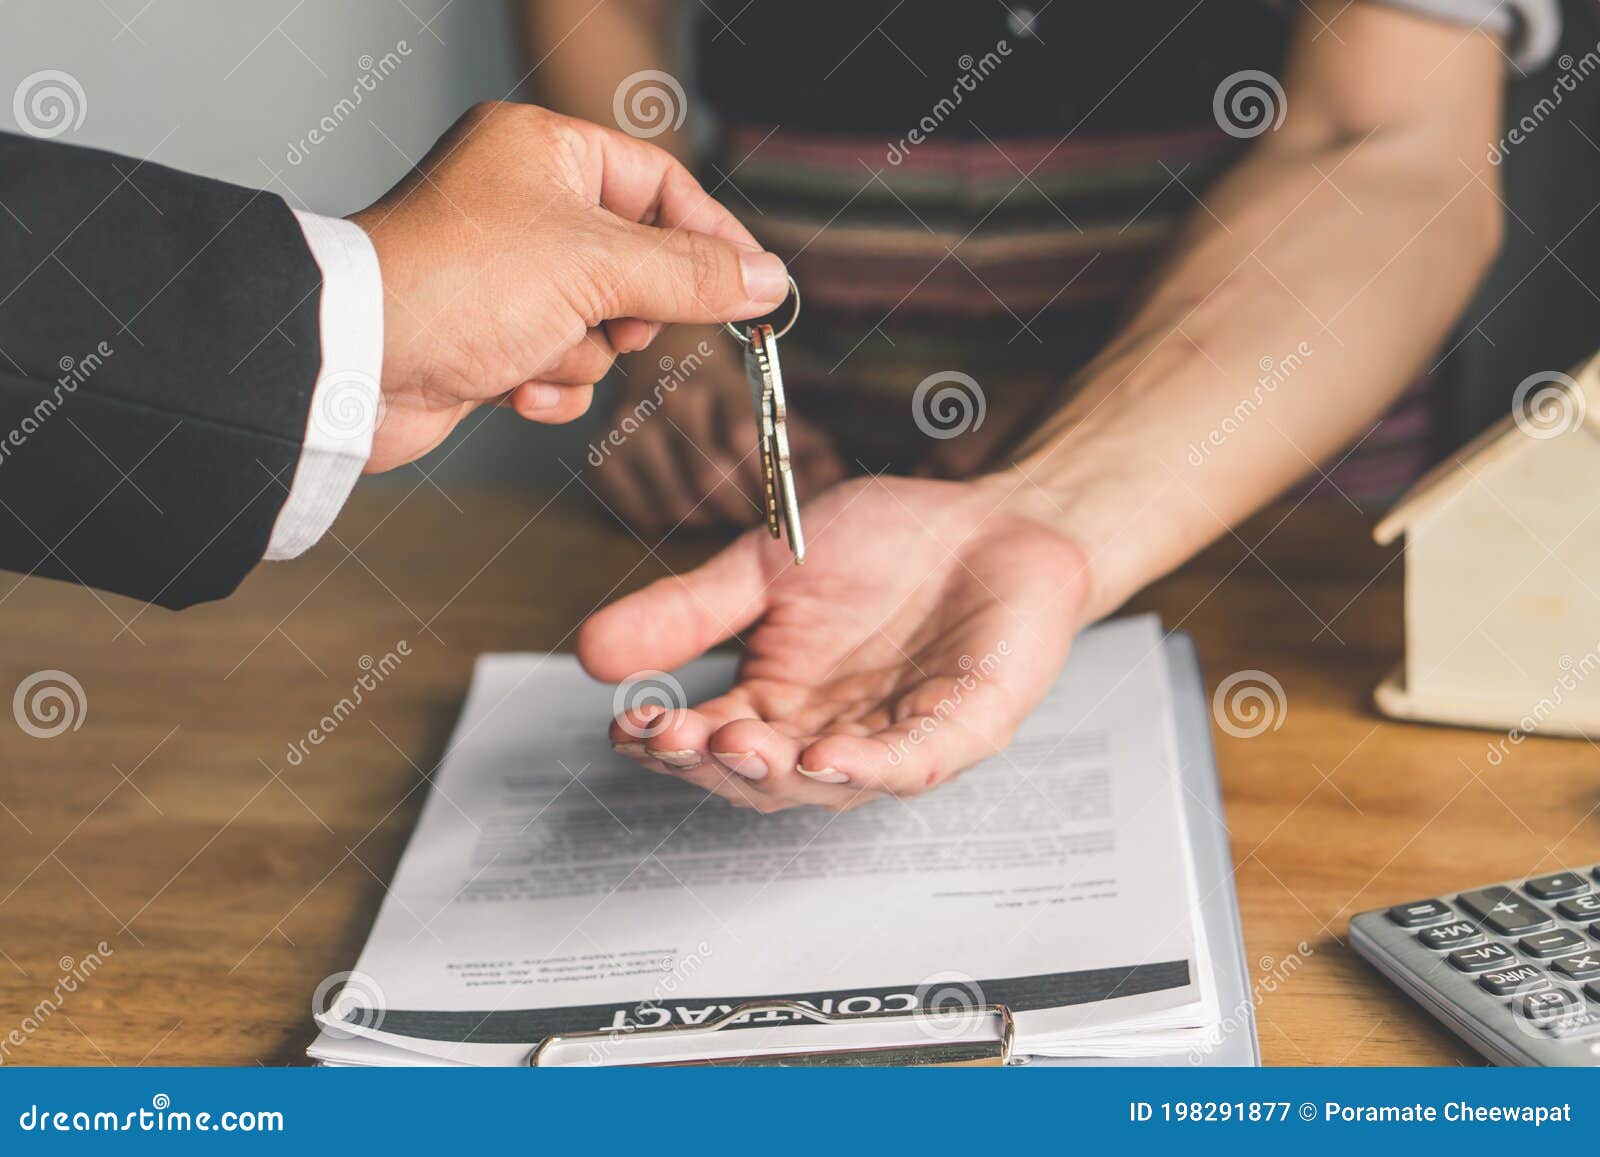 realtor agent giving a key of apartment to new owner after signed lease agreement